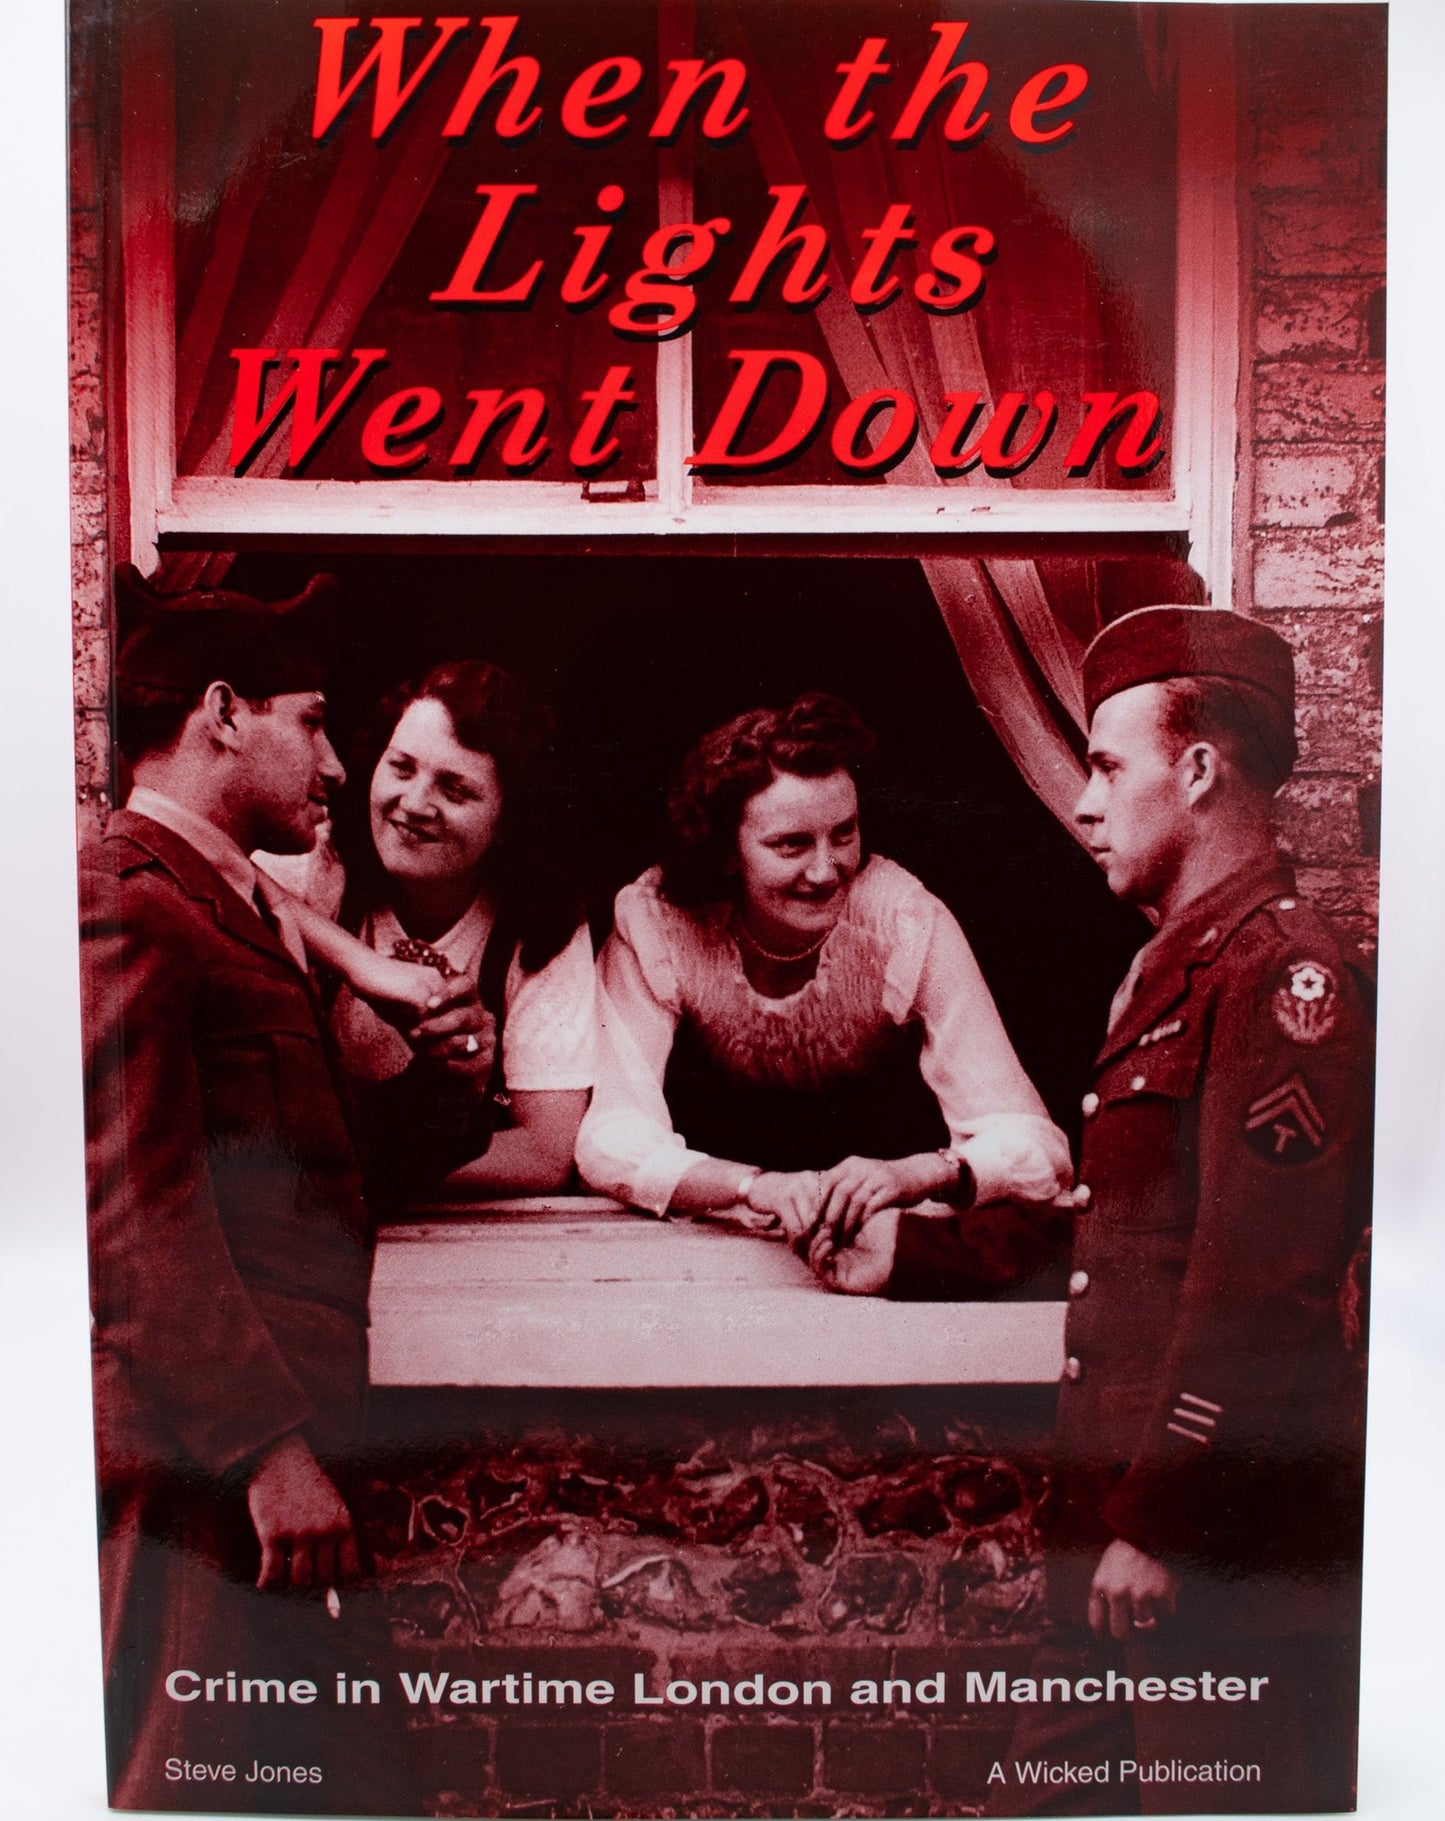 When the Lights Went Down: Crime in Wartime London and Manchester